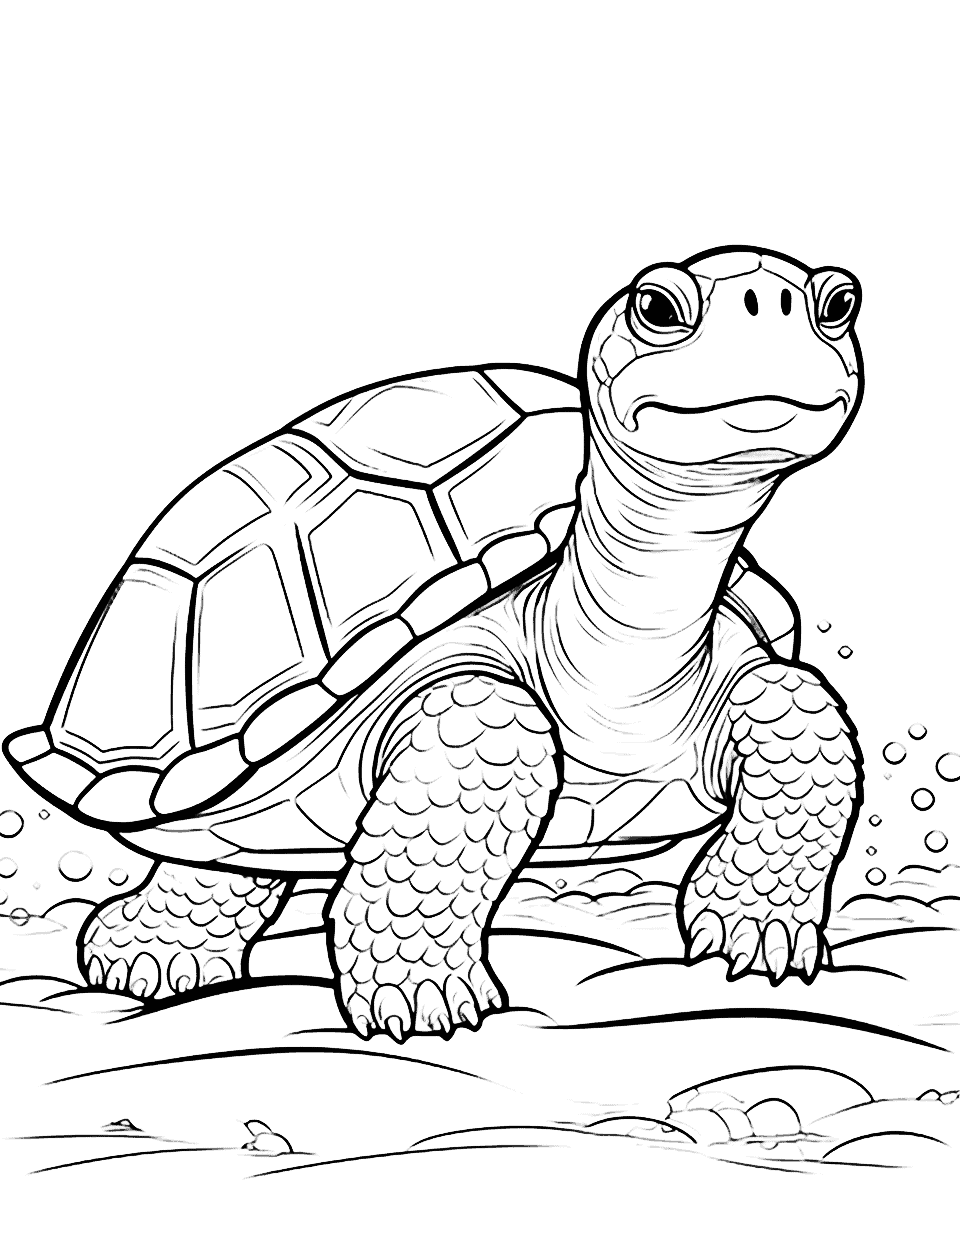 Wise Turtle Animal Coloring Page - A wise old turtle resting on a rock, observing its surroundings.